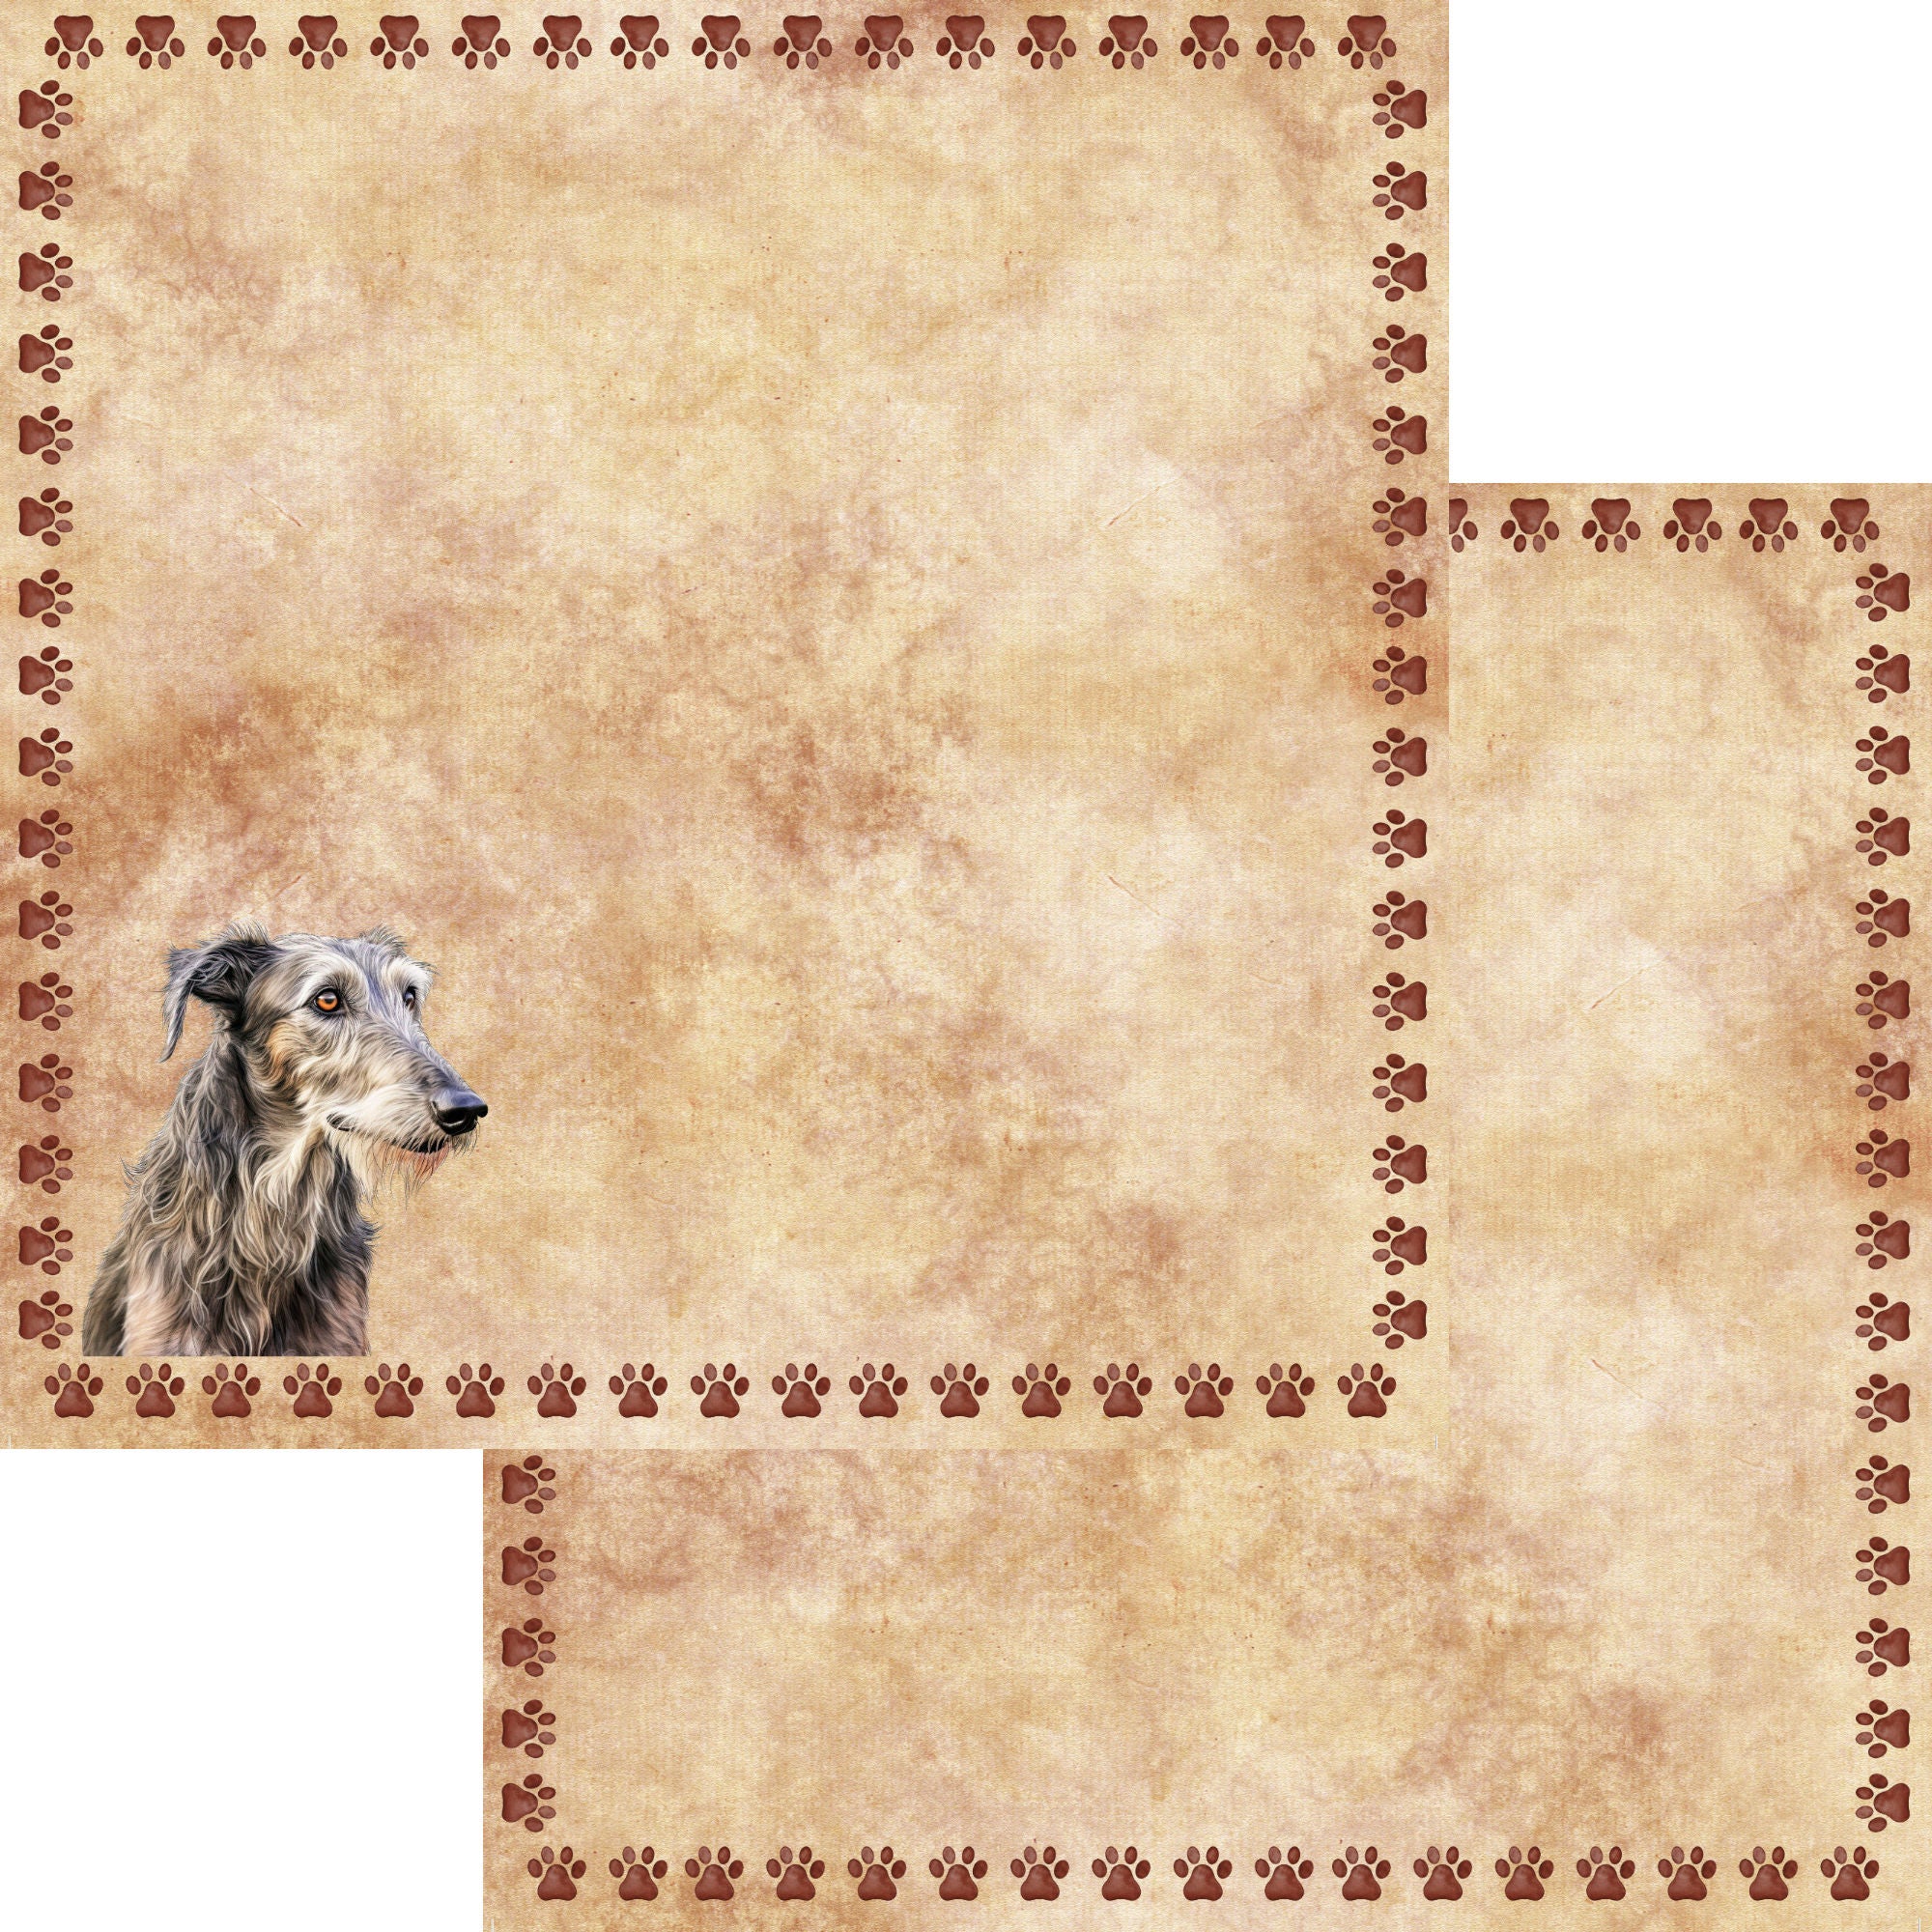 Dog Breeds Collection Irish Wolfhound 12 x 12 Double-Sided Scrapbook Paper by SSC Designs